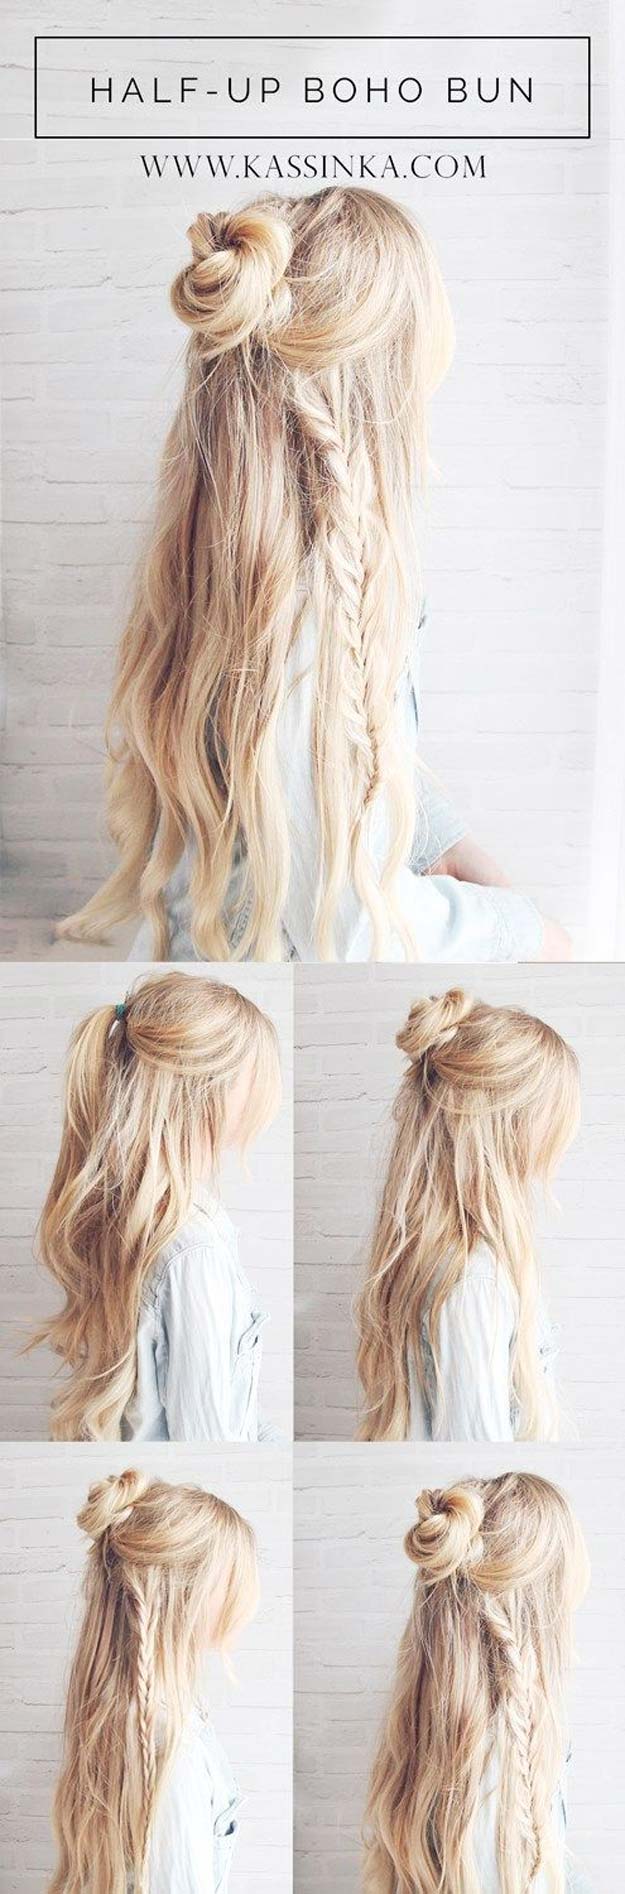 easy-and-stylish-hairstyles-for-long-hair-34_8 Easy and stylish hairstyles for long hair